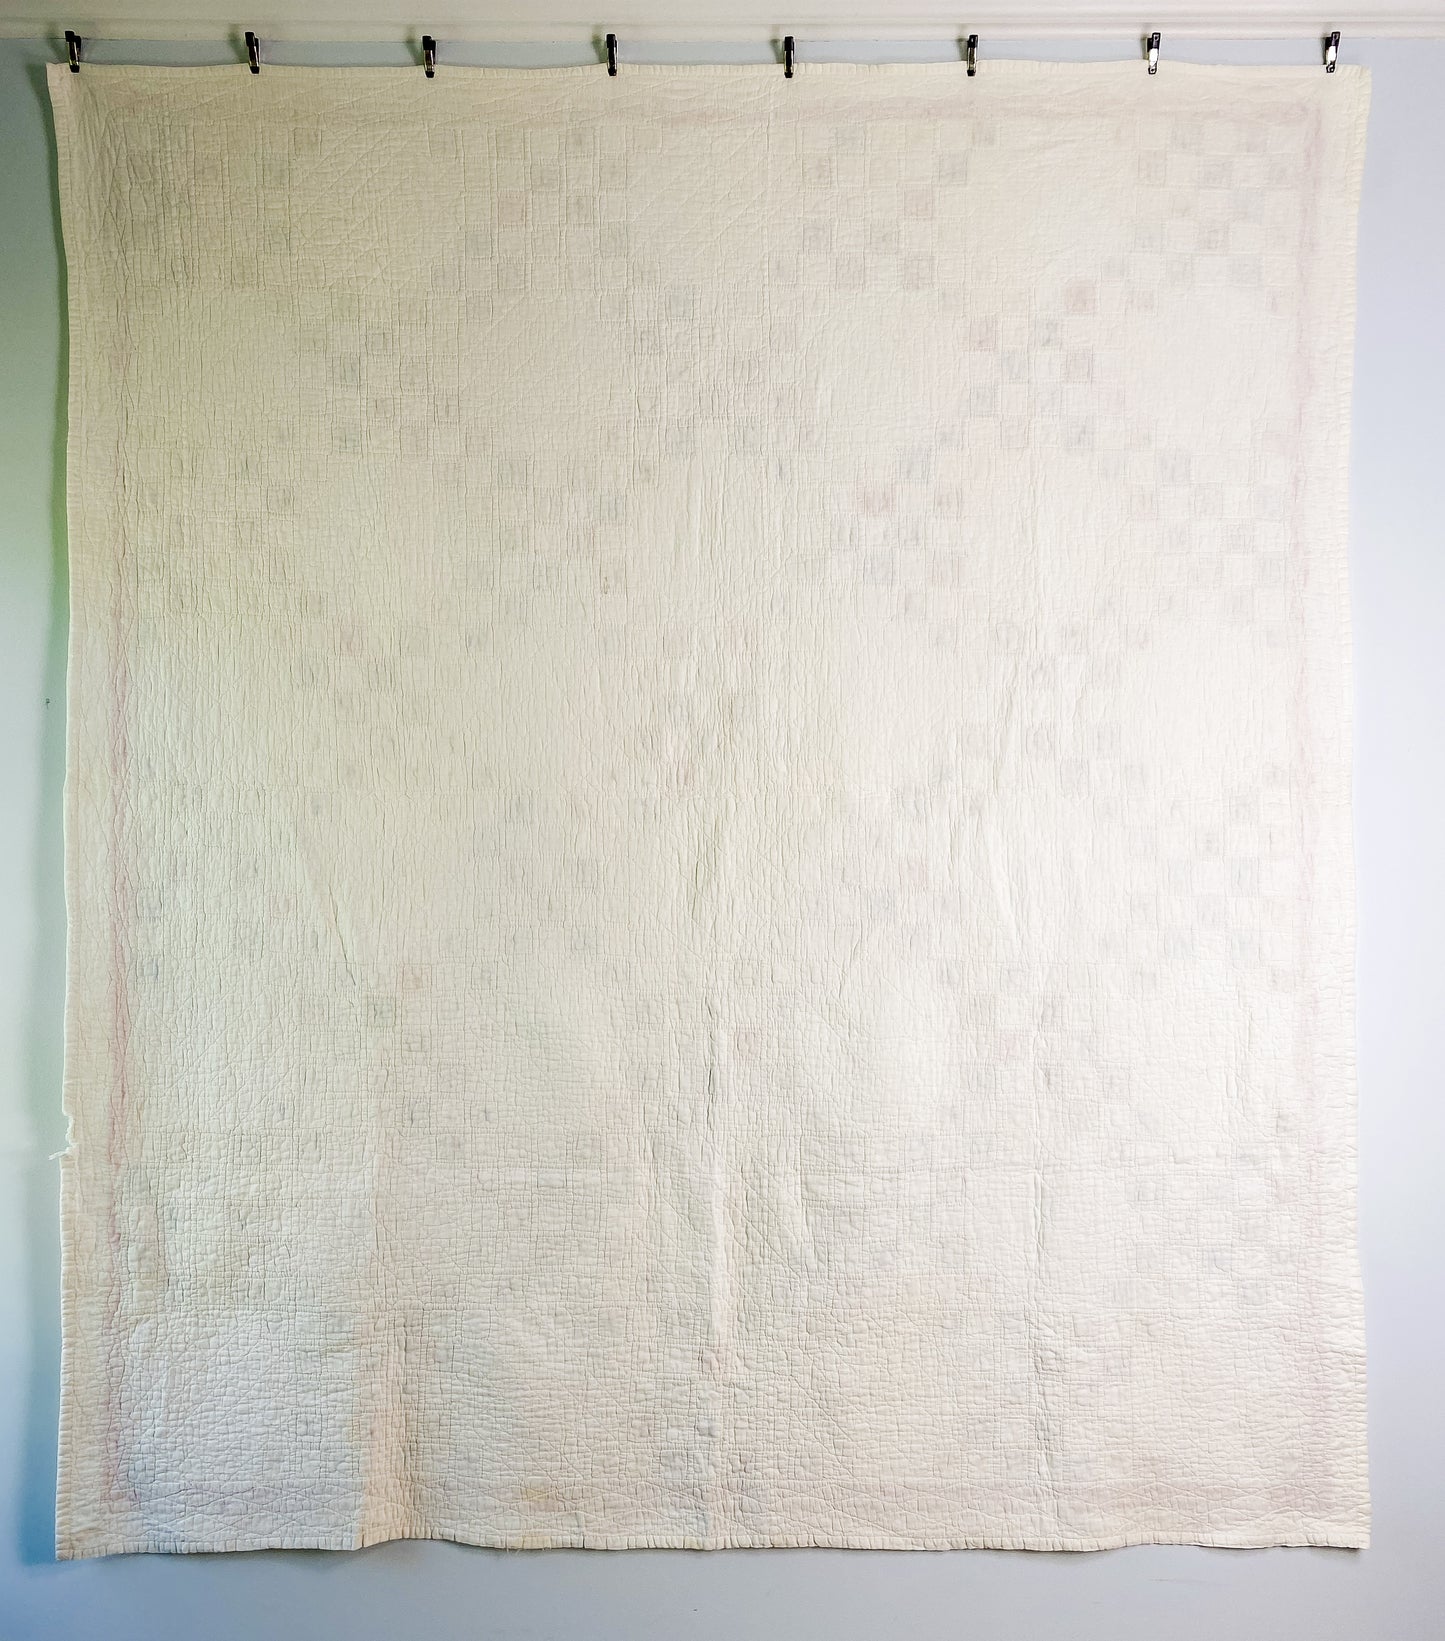 Vintage Pink and White Double Irish Chain Quilt, c1950